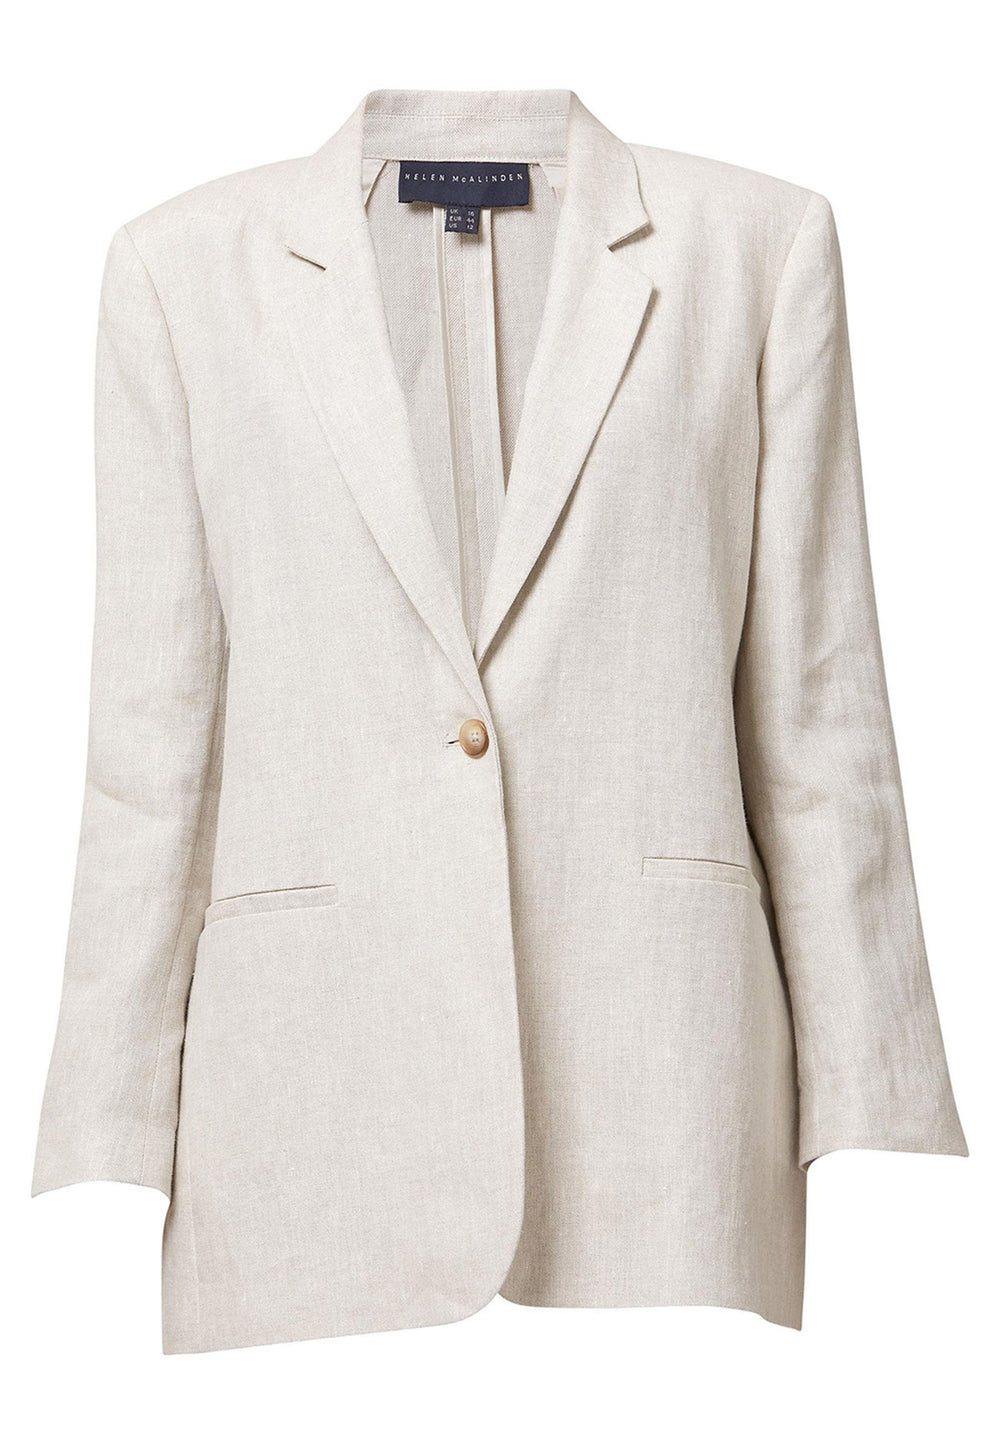 Cassie, the investment-worthy oatmeal linen blazer. A perfect blend of summer elegance and versatility. Featuring minimalist styling with a single button fastening and an oversized, slightly boxy silhouette, it offers effortless sophistication. Pair with a simple tee and the coordinating Vanessa pant, complemented by trainers for a chic and contemporary look.